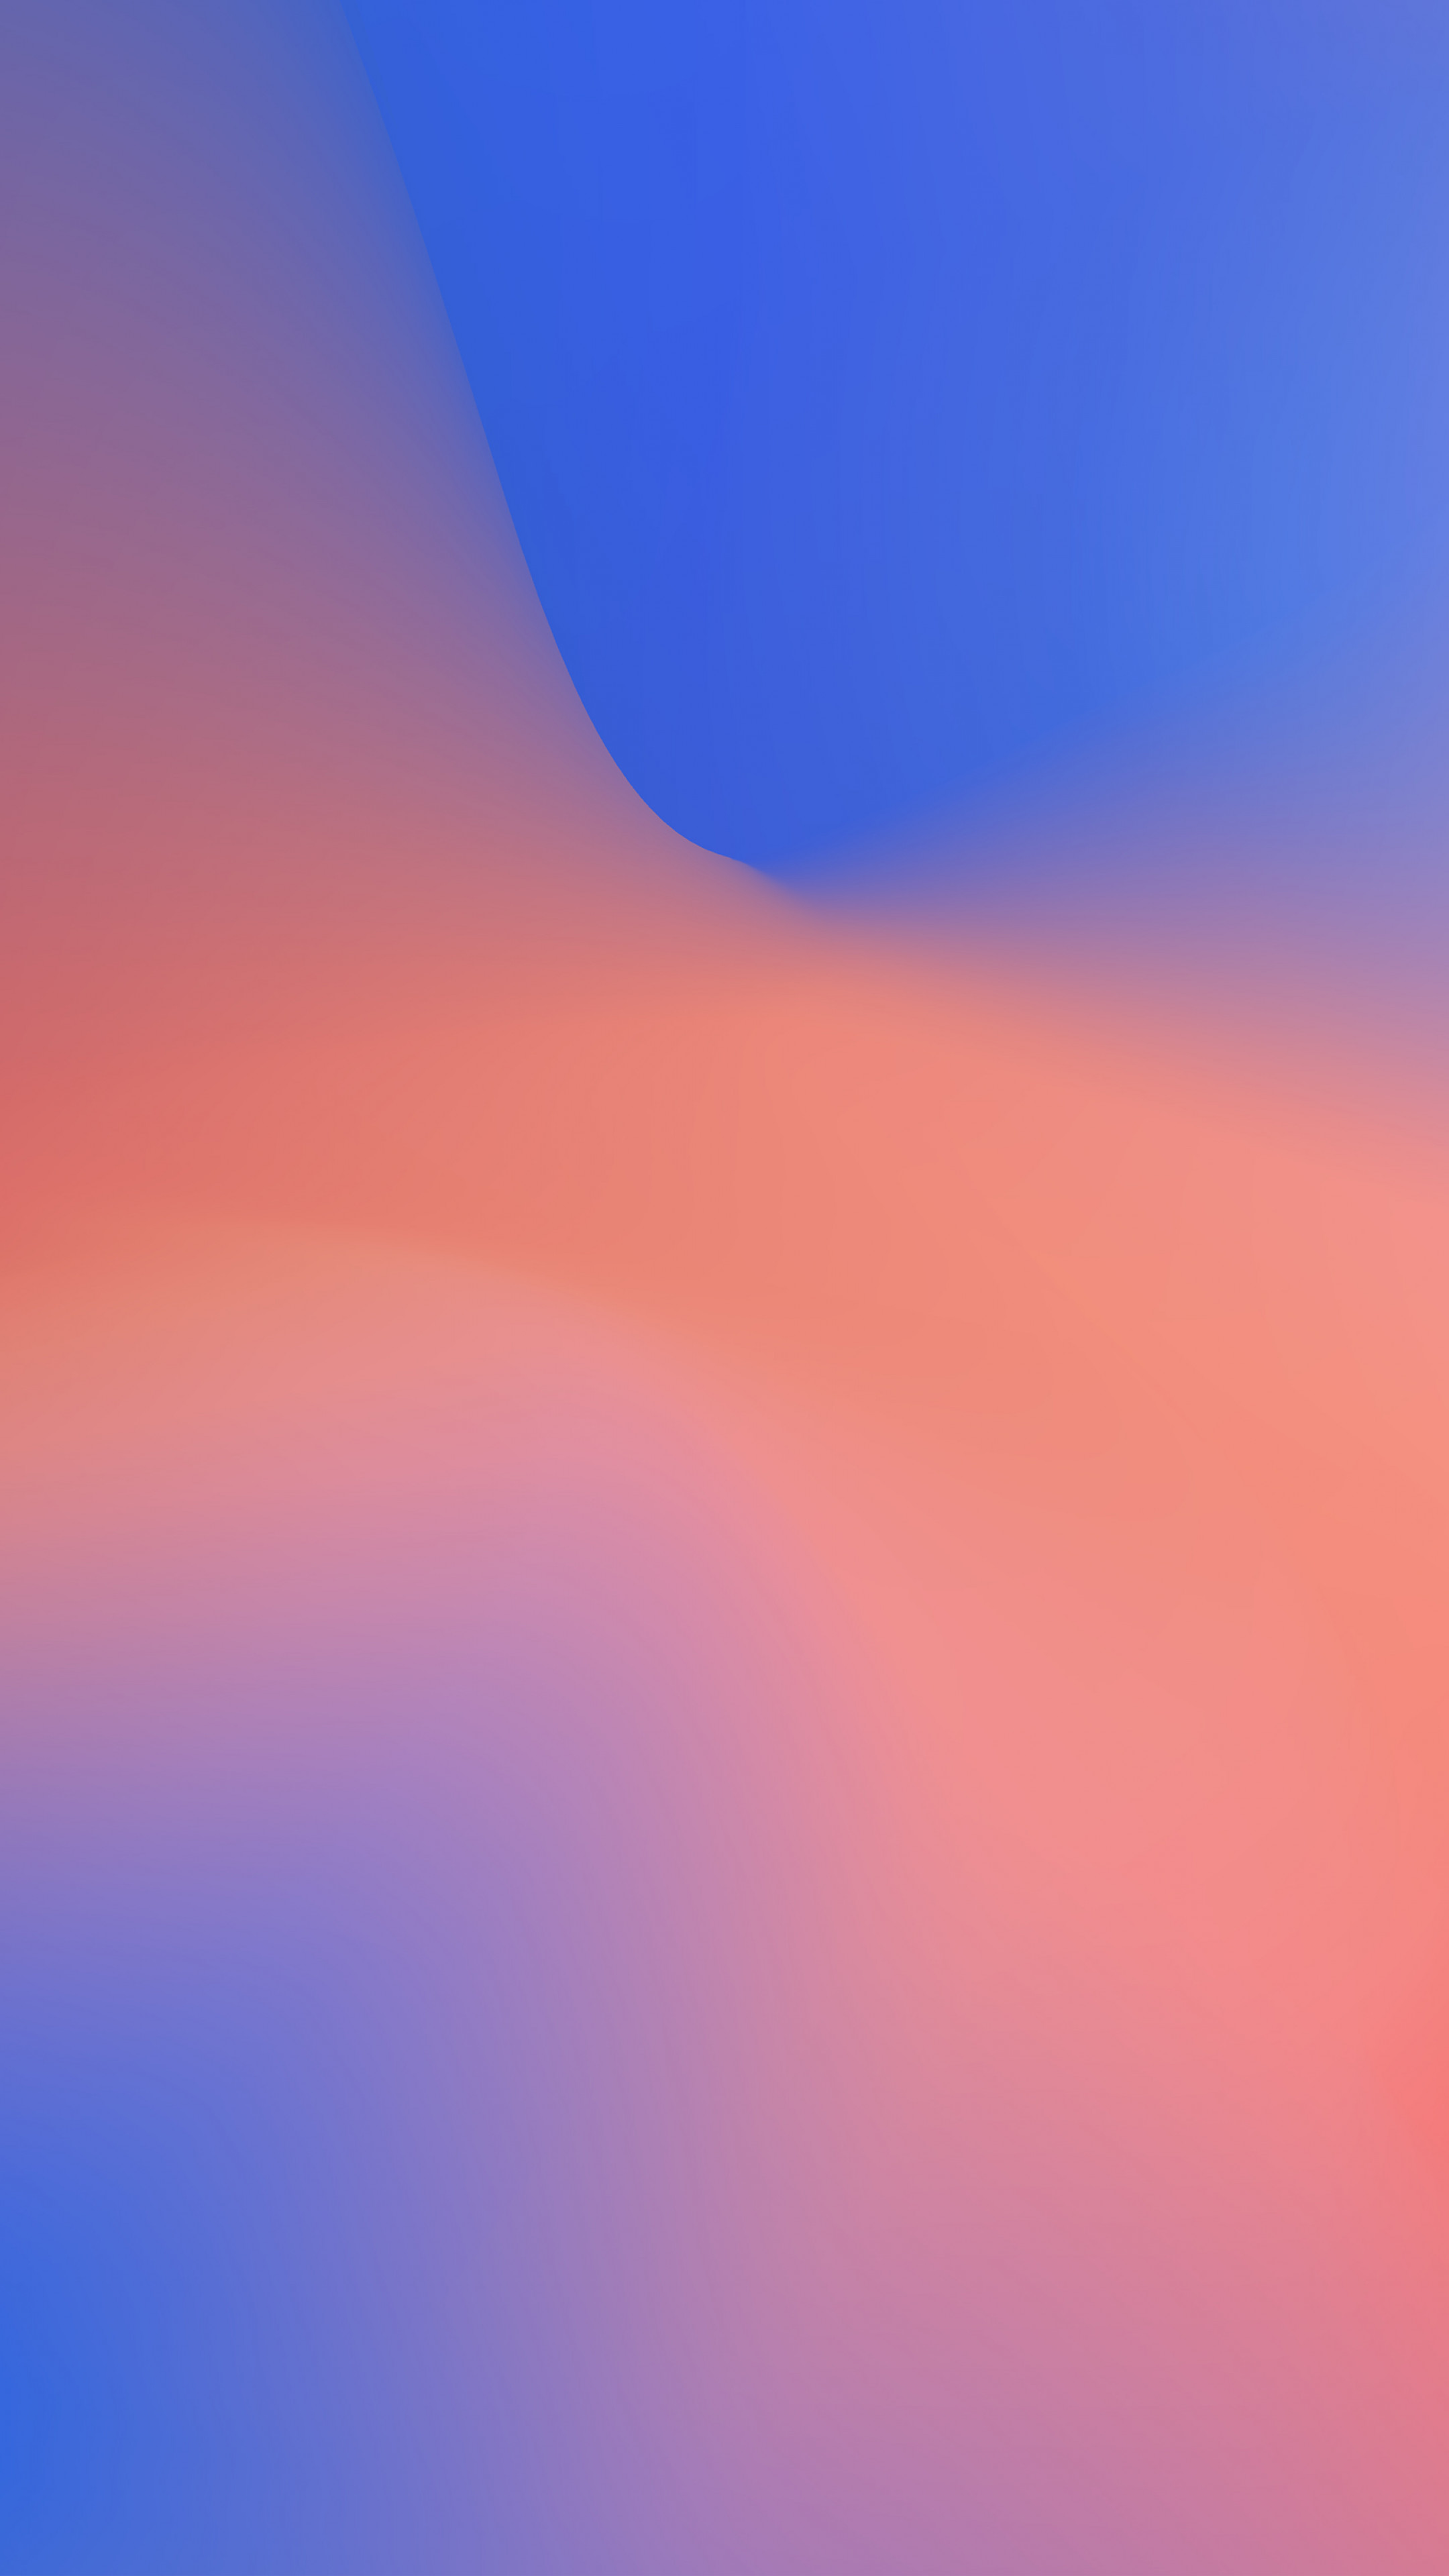 Wallpaper Google Pixel 3 Android 9 Pie Abstract 4k Os 6